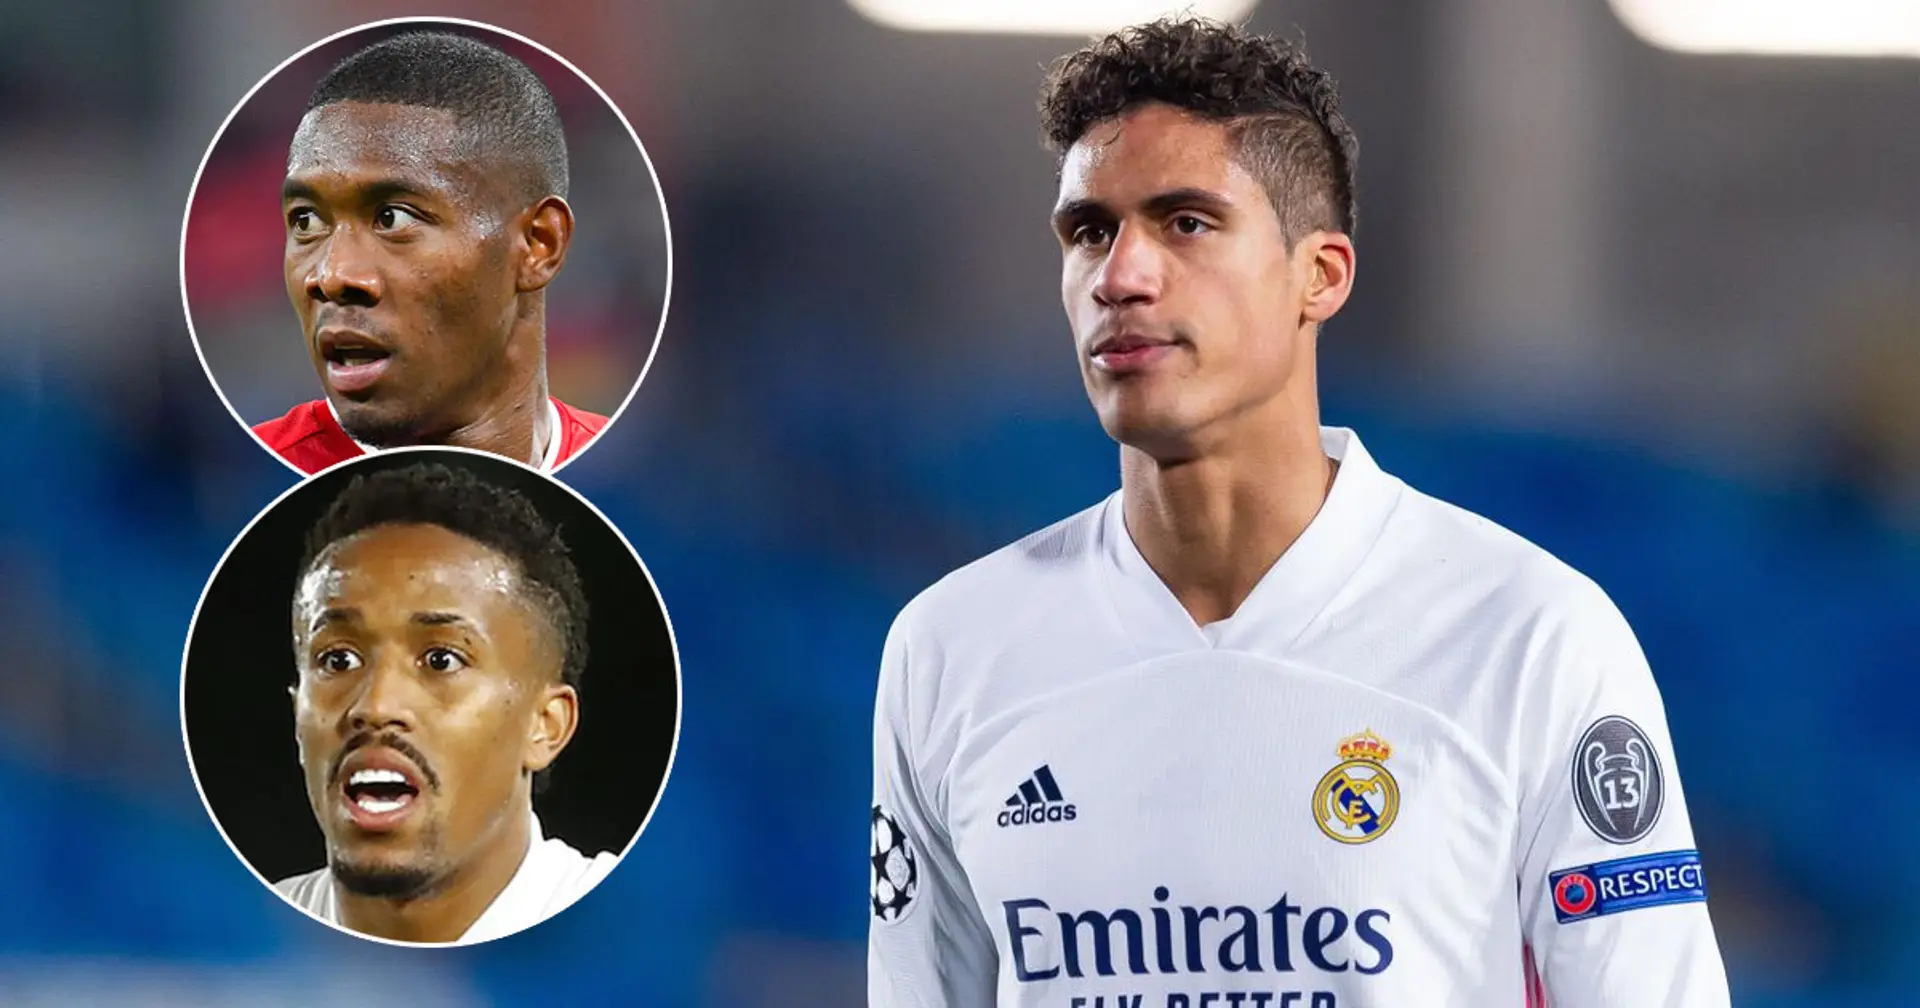 Real Madrid not planning to buy new defenders even if Varane leaves (reliability: 4 stars)